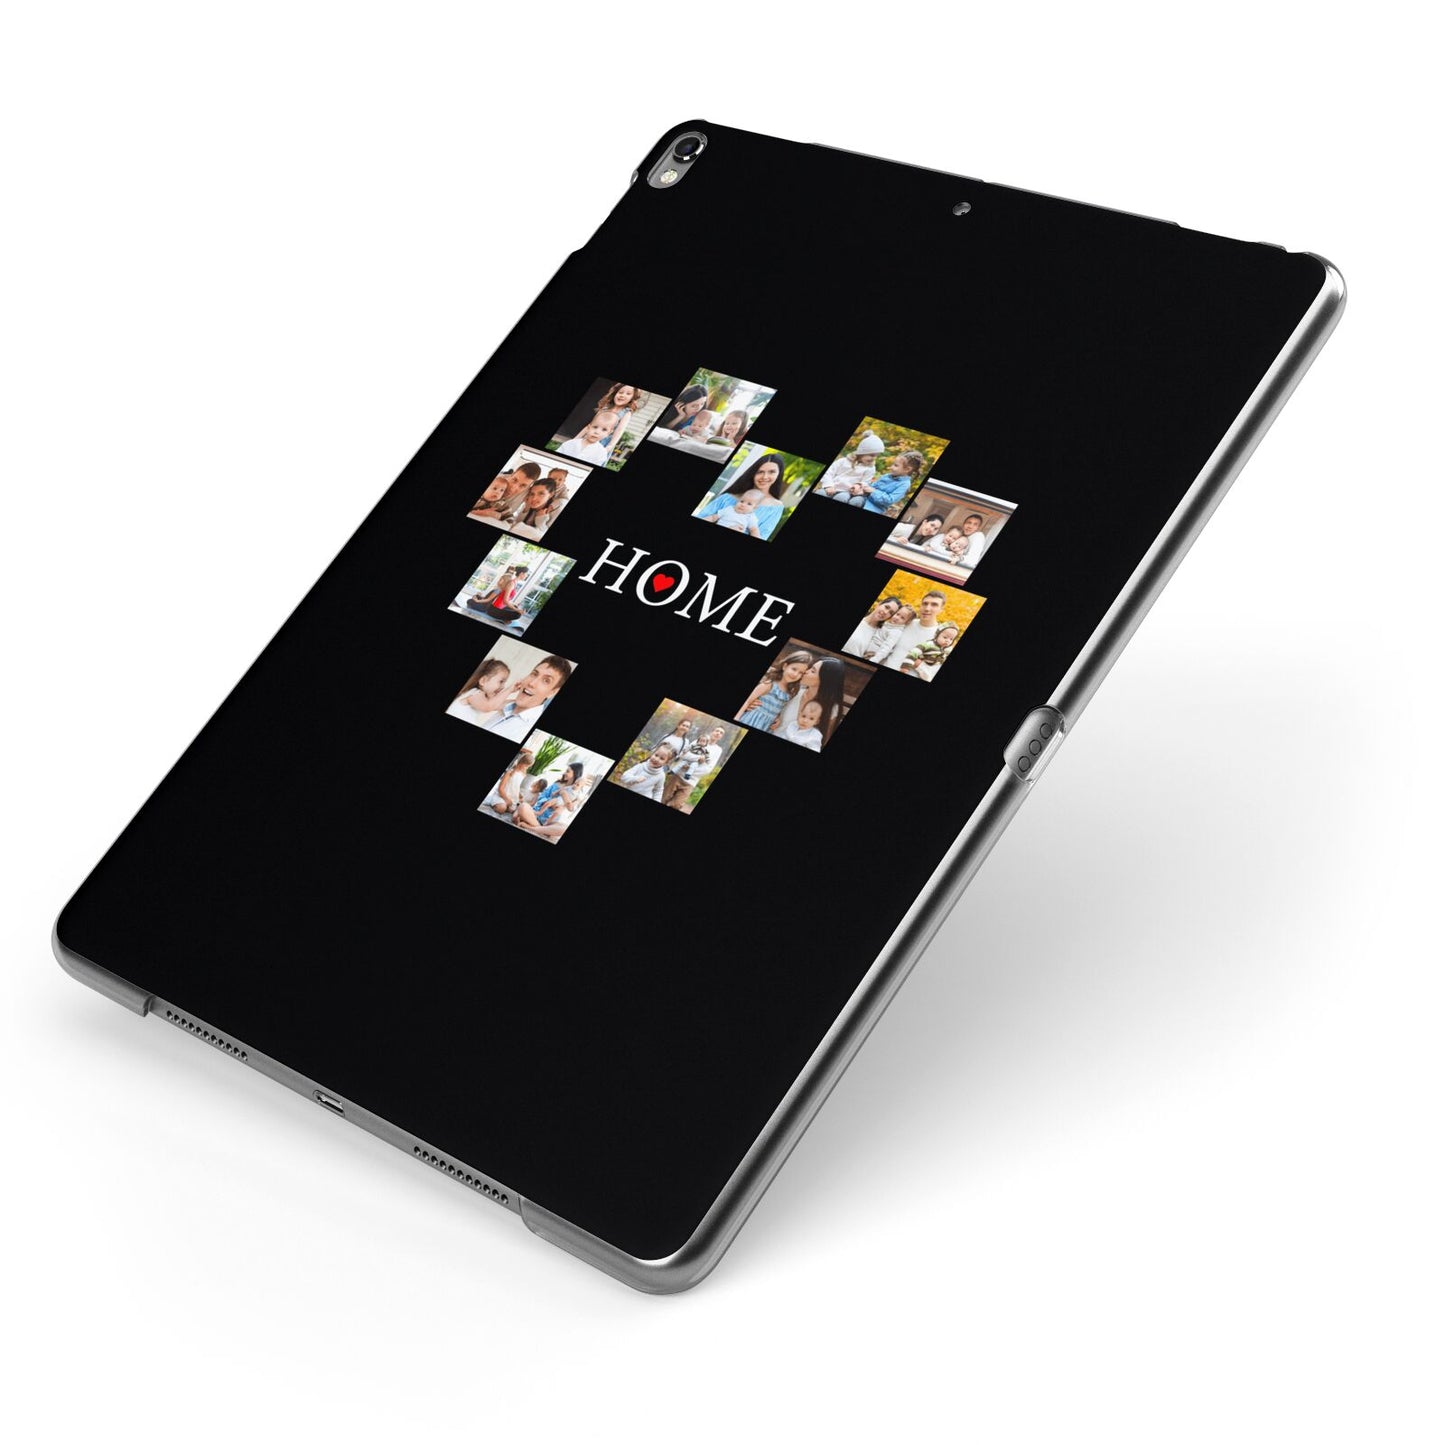 Photos of Home Personalised Apple iPad Case on Grey iPad Side View